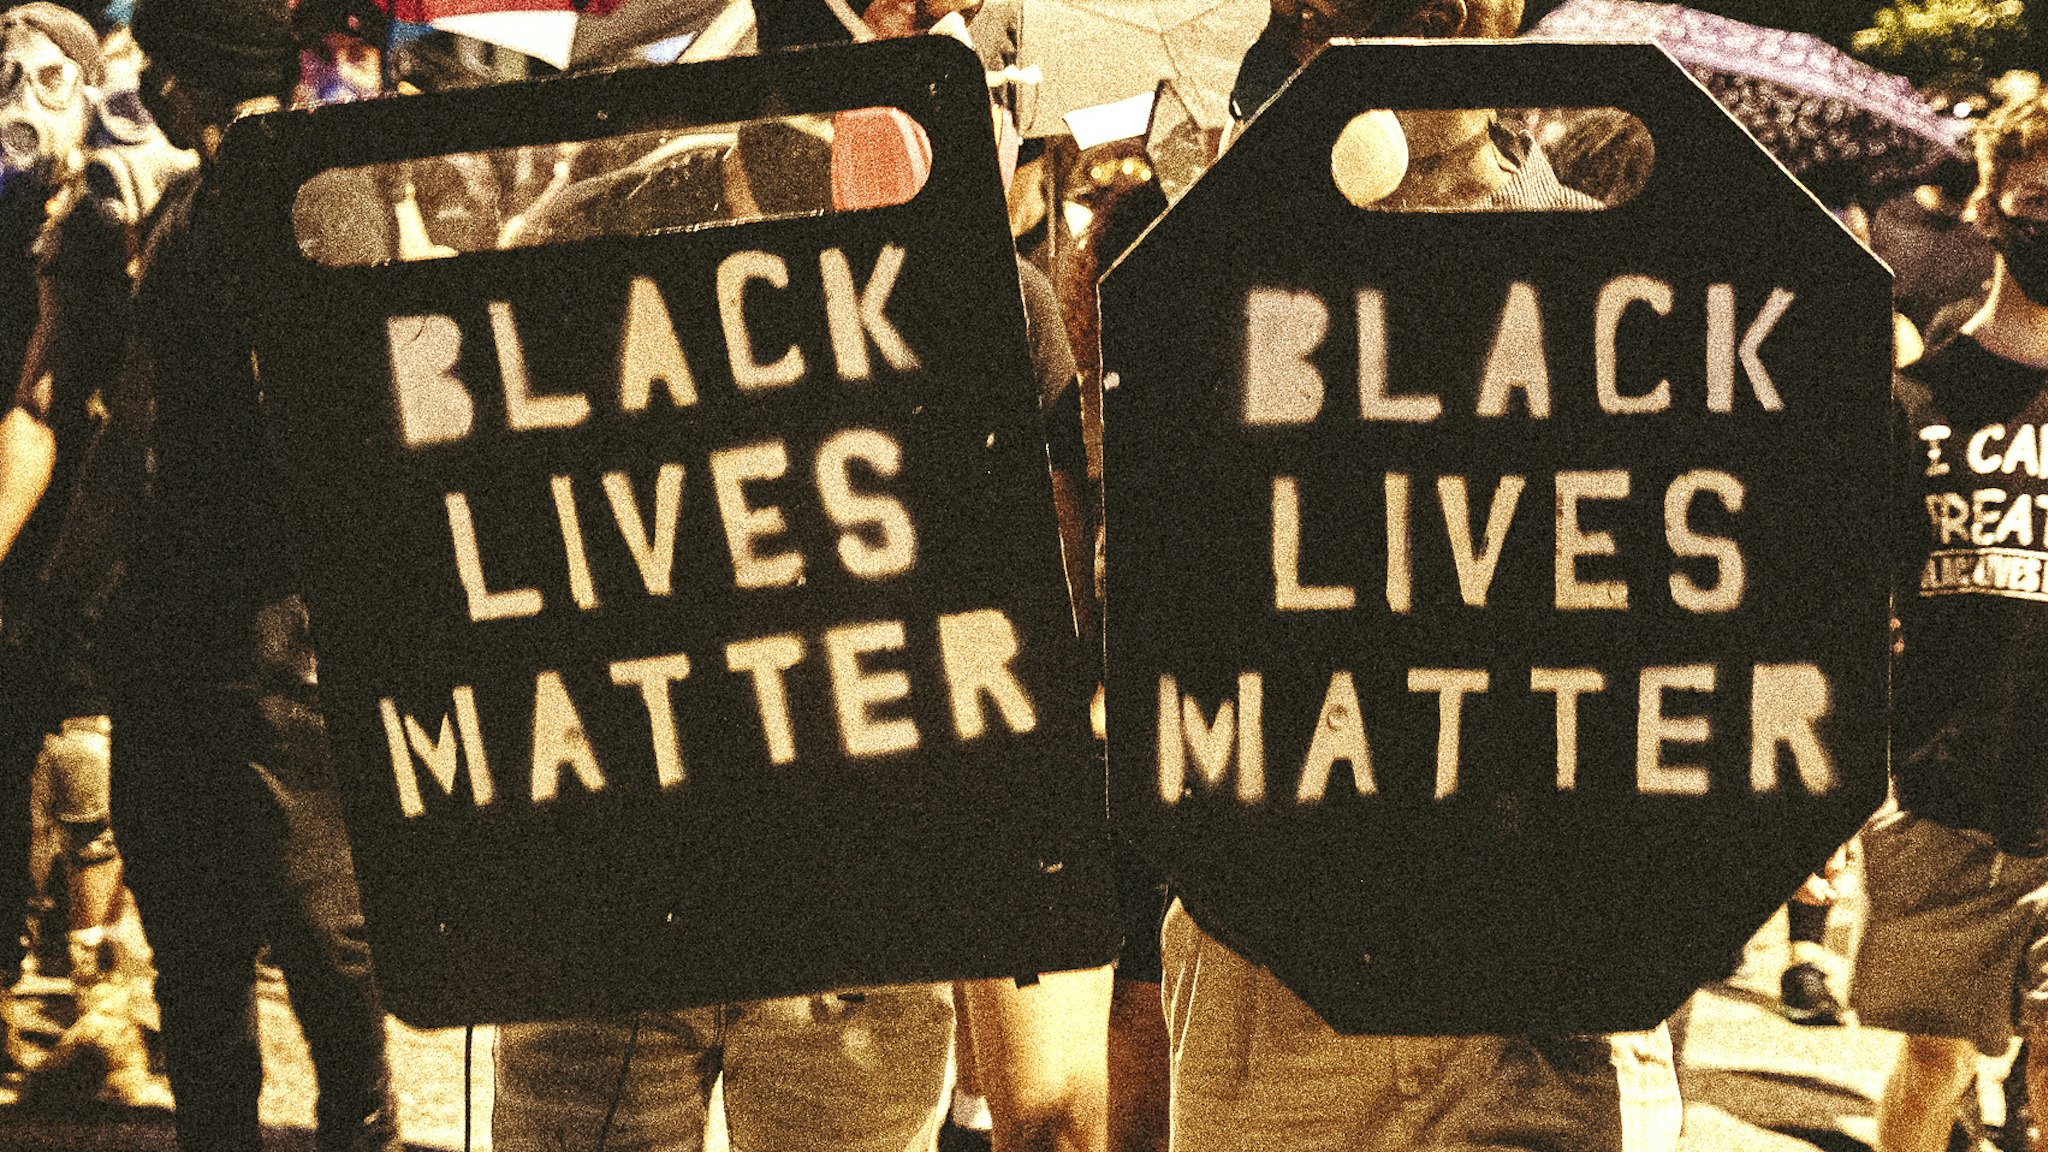 RICHMOND, VA - JULY 25: People carrying homemade Black Lives Matter shields march in front of protesters on July 25, 2020 in Richmond, Virginia. Protesters in Richmond took to the streets to join other protesters around the country for the Stand With Portland rally in support of the Black Lives Matter protesters in Portland, Oregon.